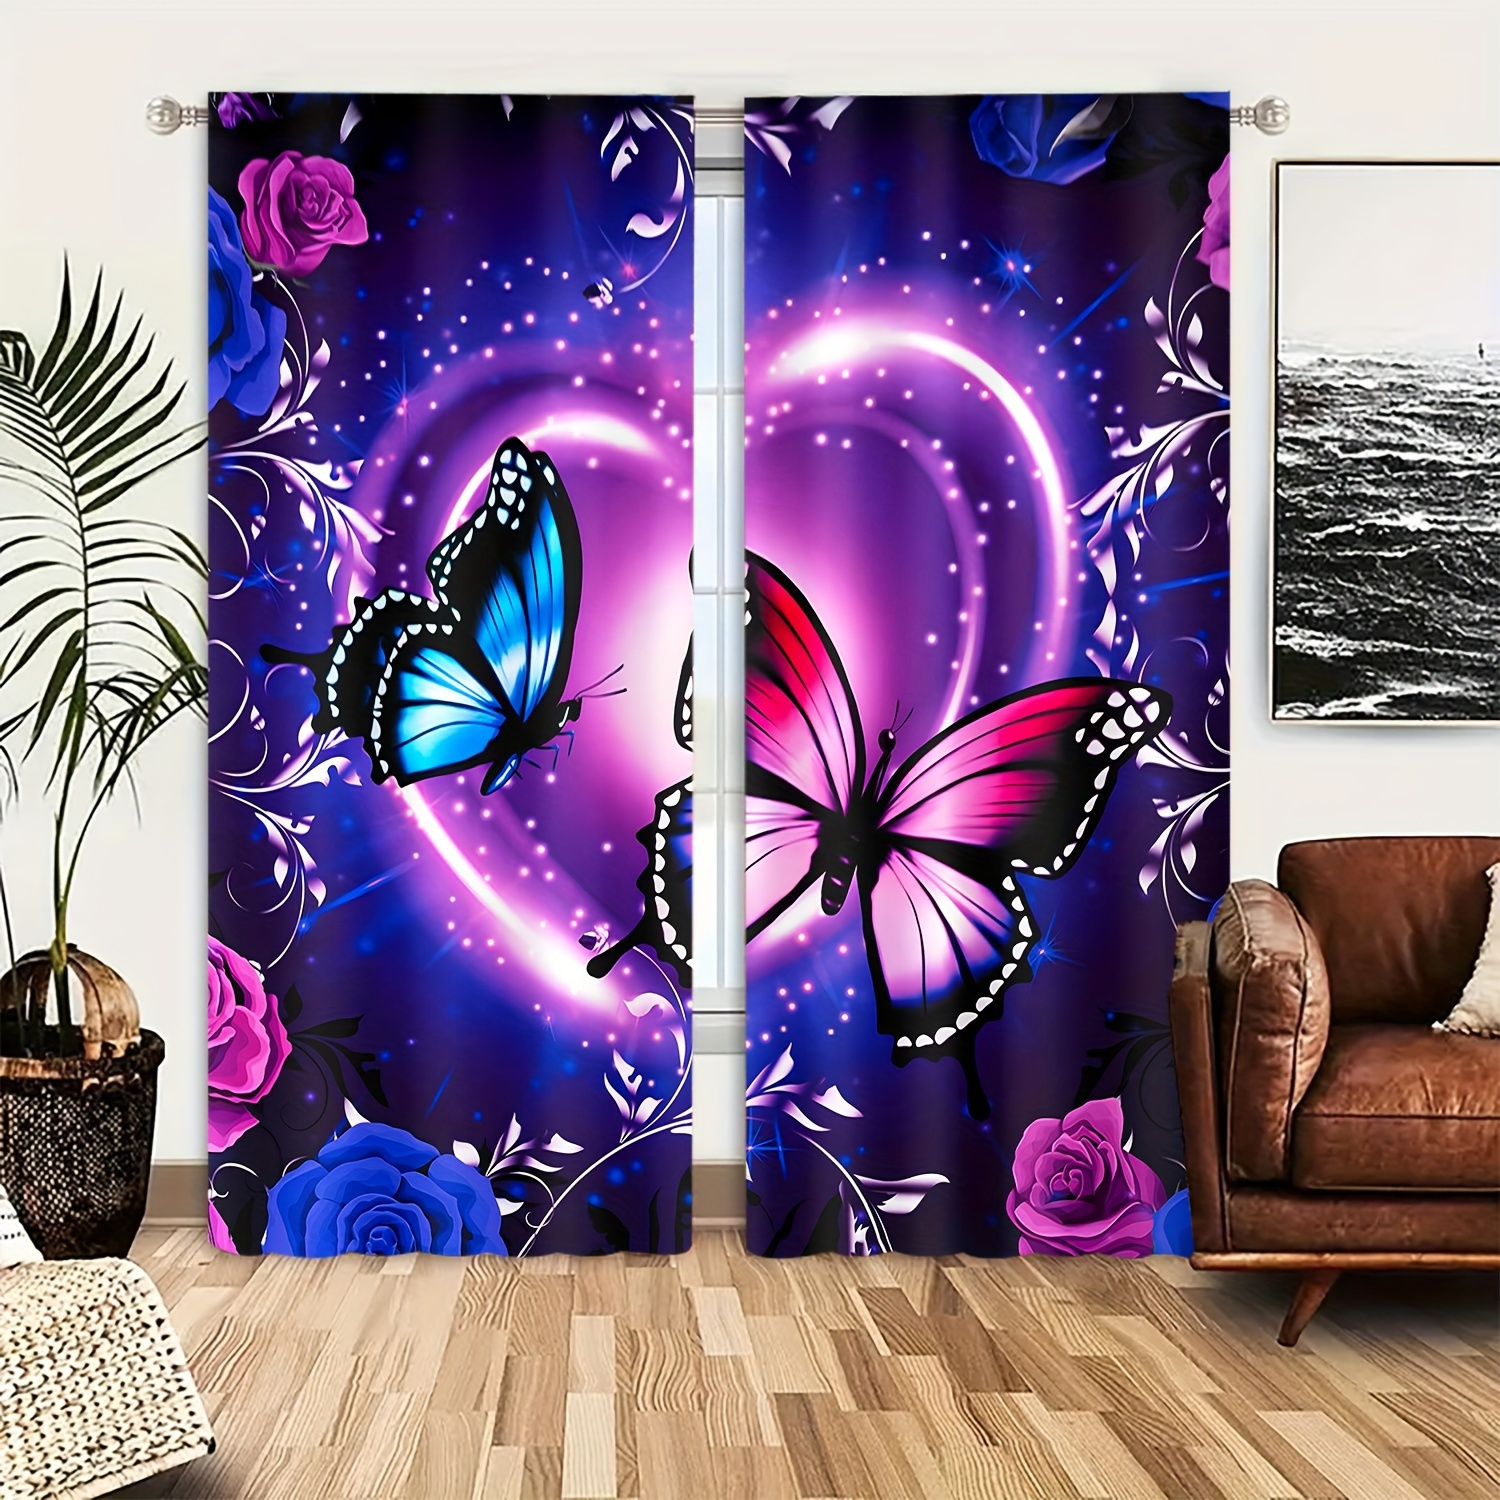 

2pcs, Fashionable Romantic Purple Butterfly Printed Curtain, Suitable For Living Room Decoration, Bedroom Blackout, Bathroom Waterproof Shower Curtain Kitchen Decoration Home Decor